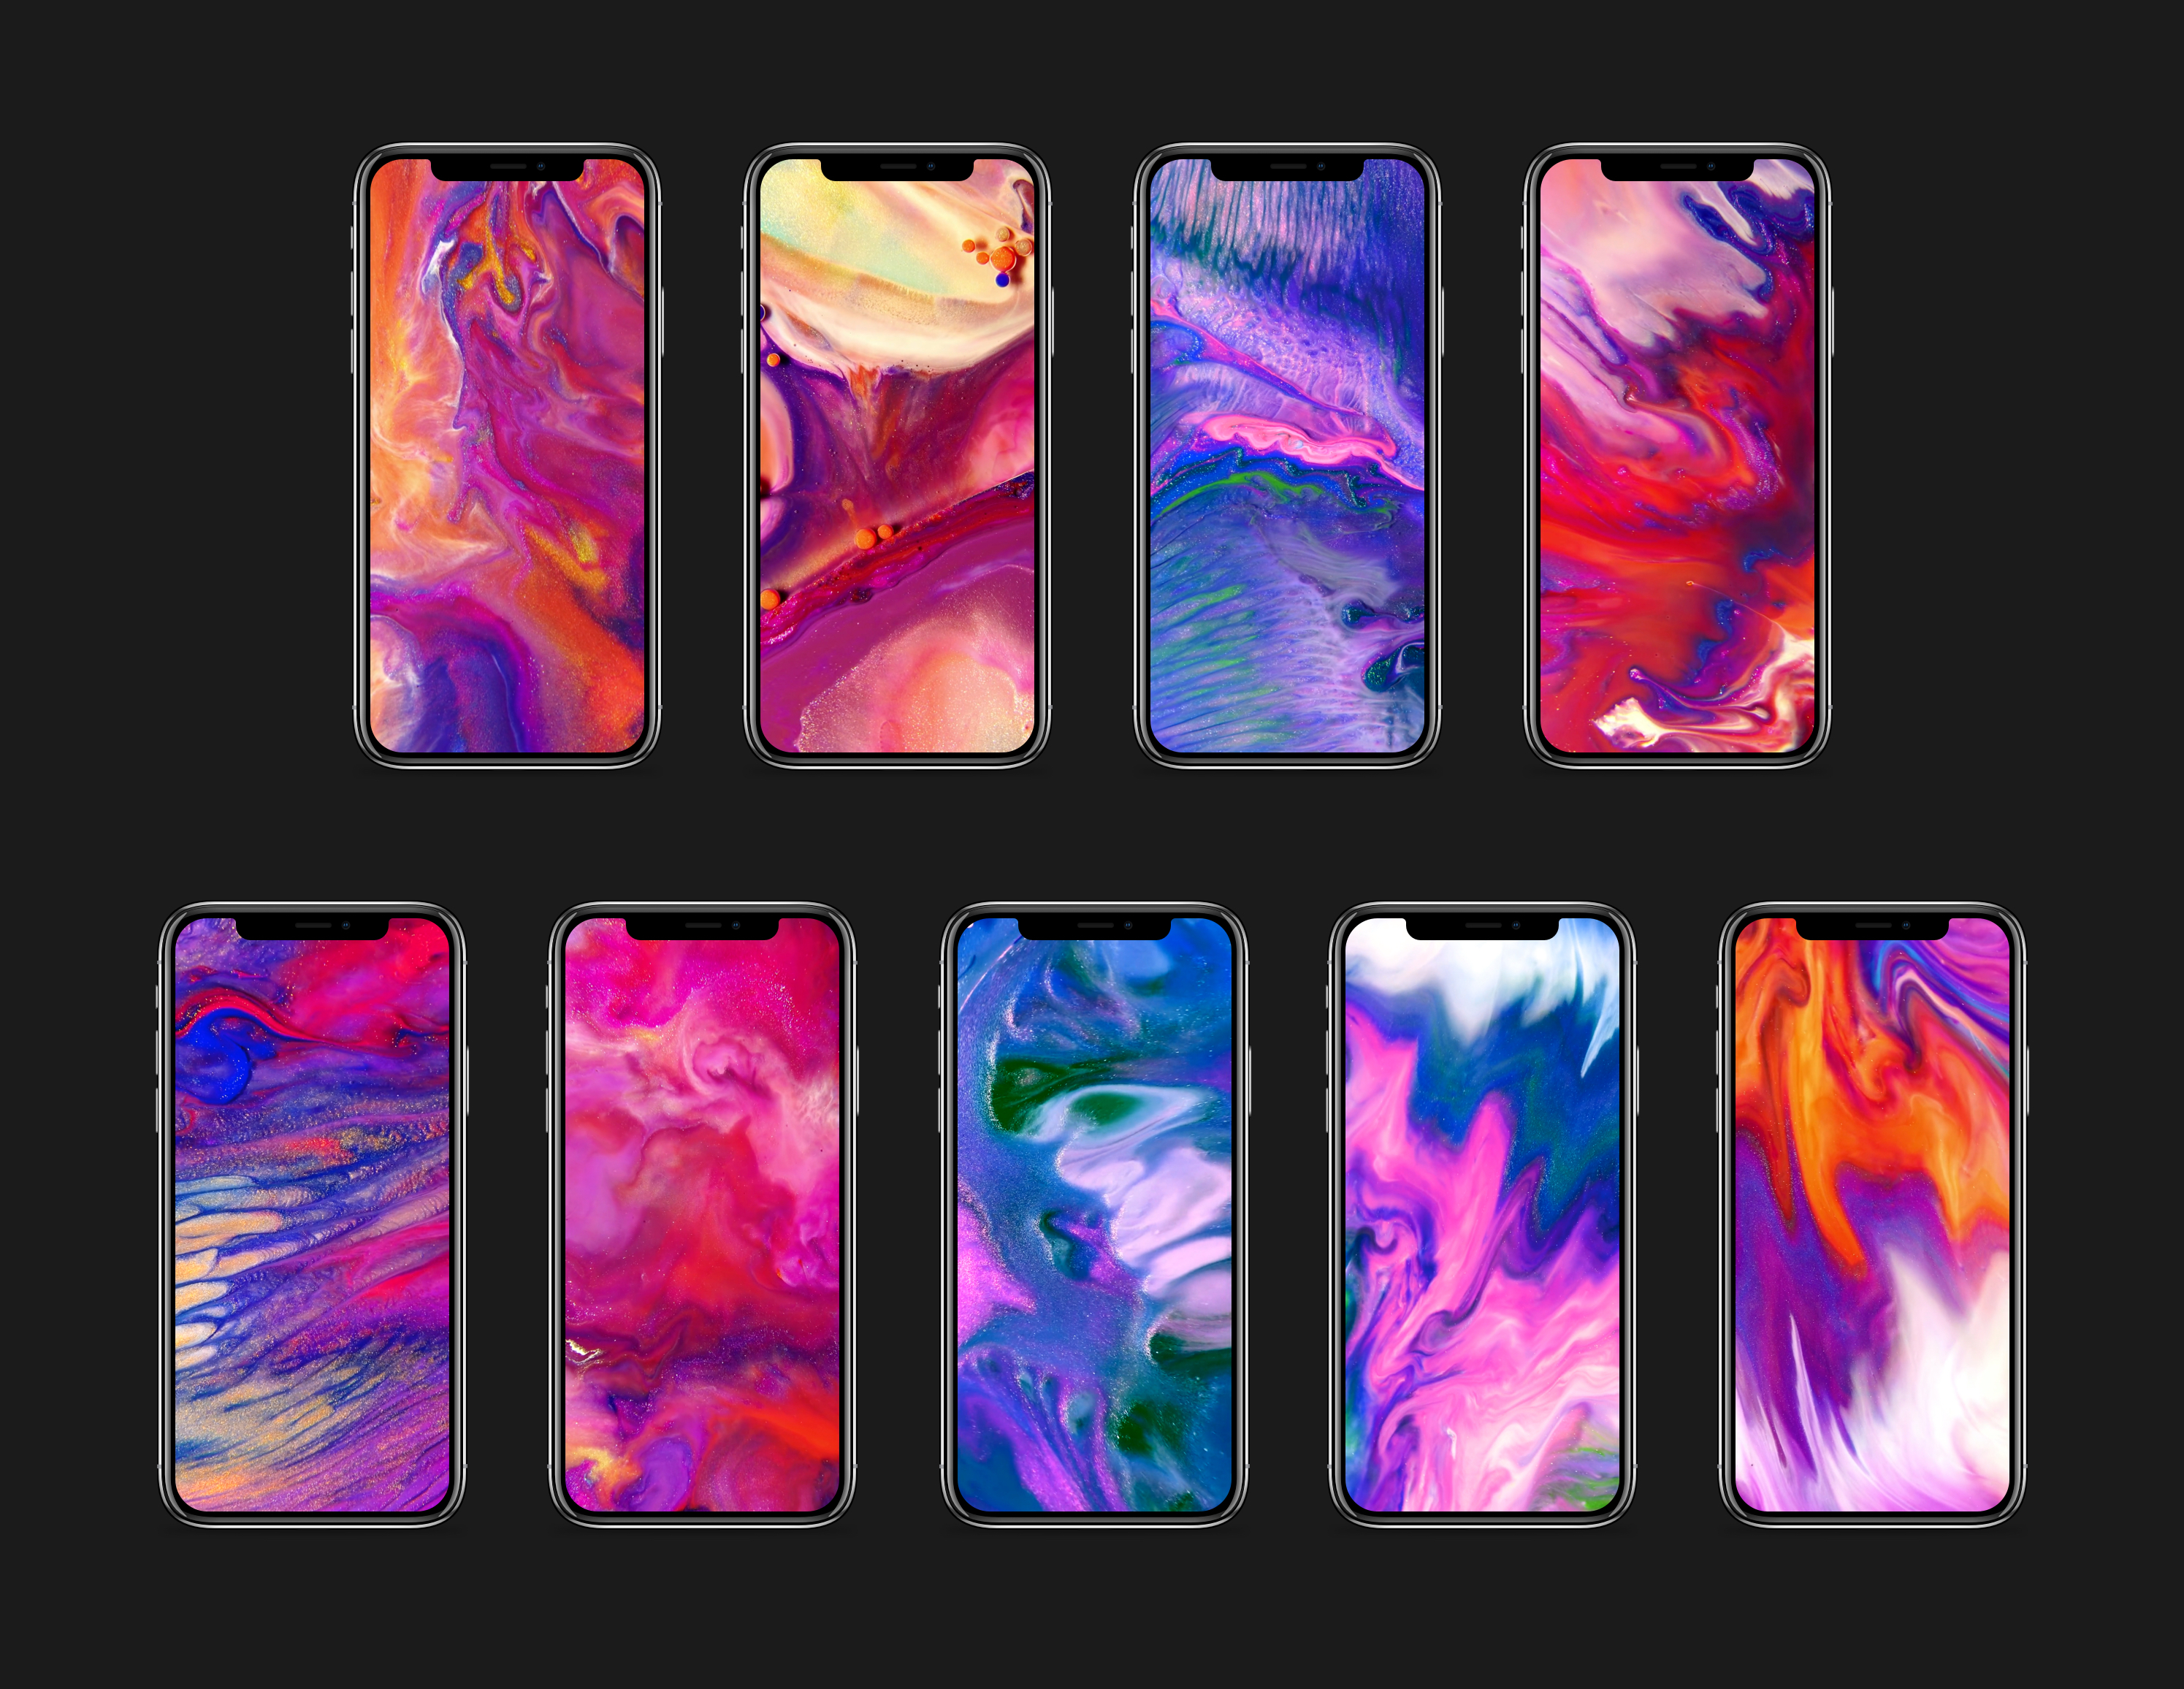 iPhone X marketing video wallpapers